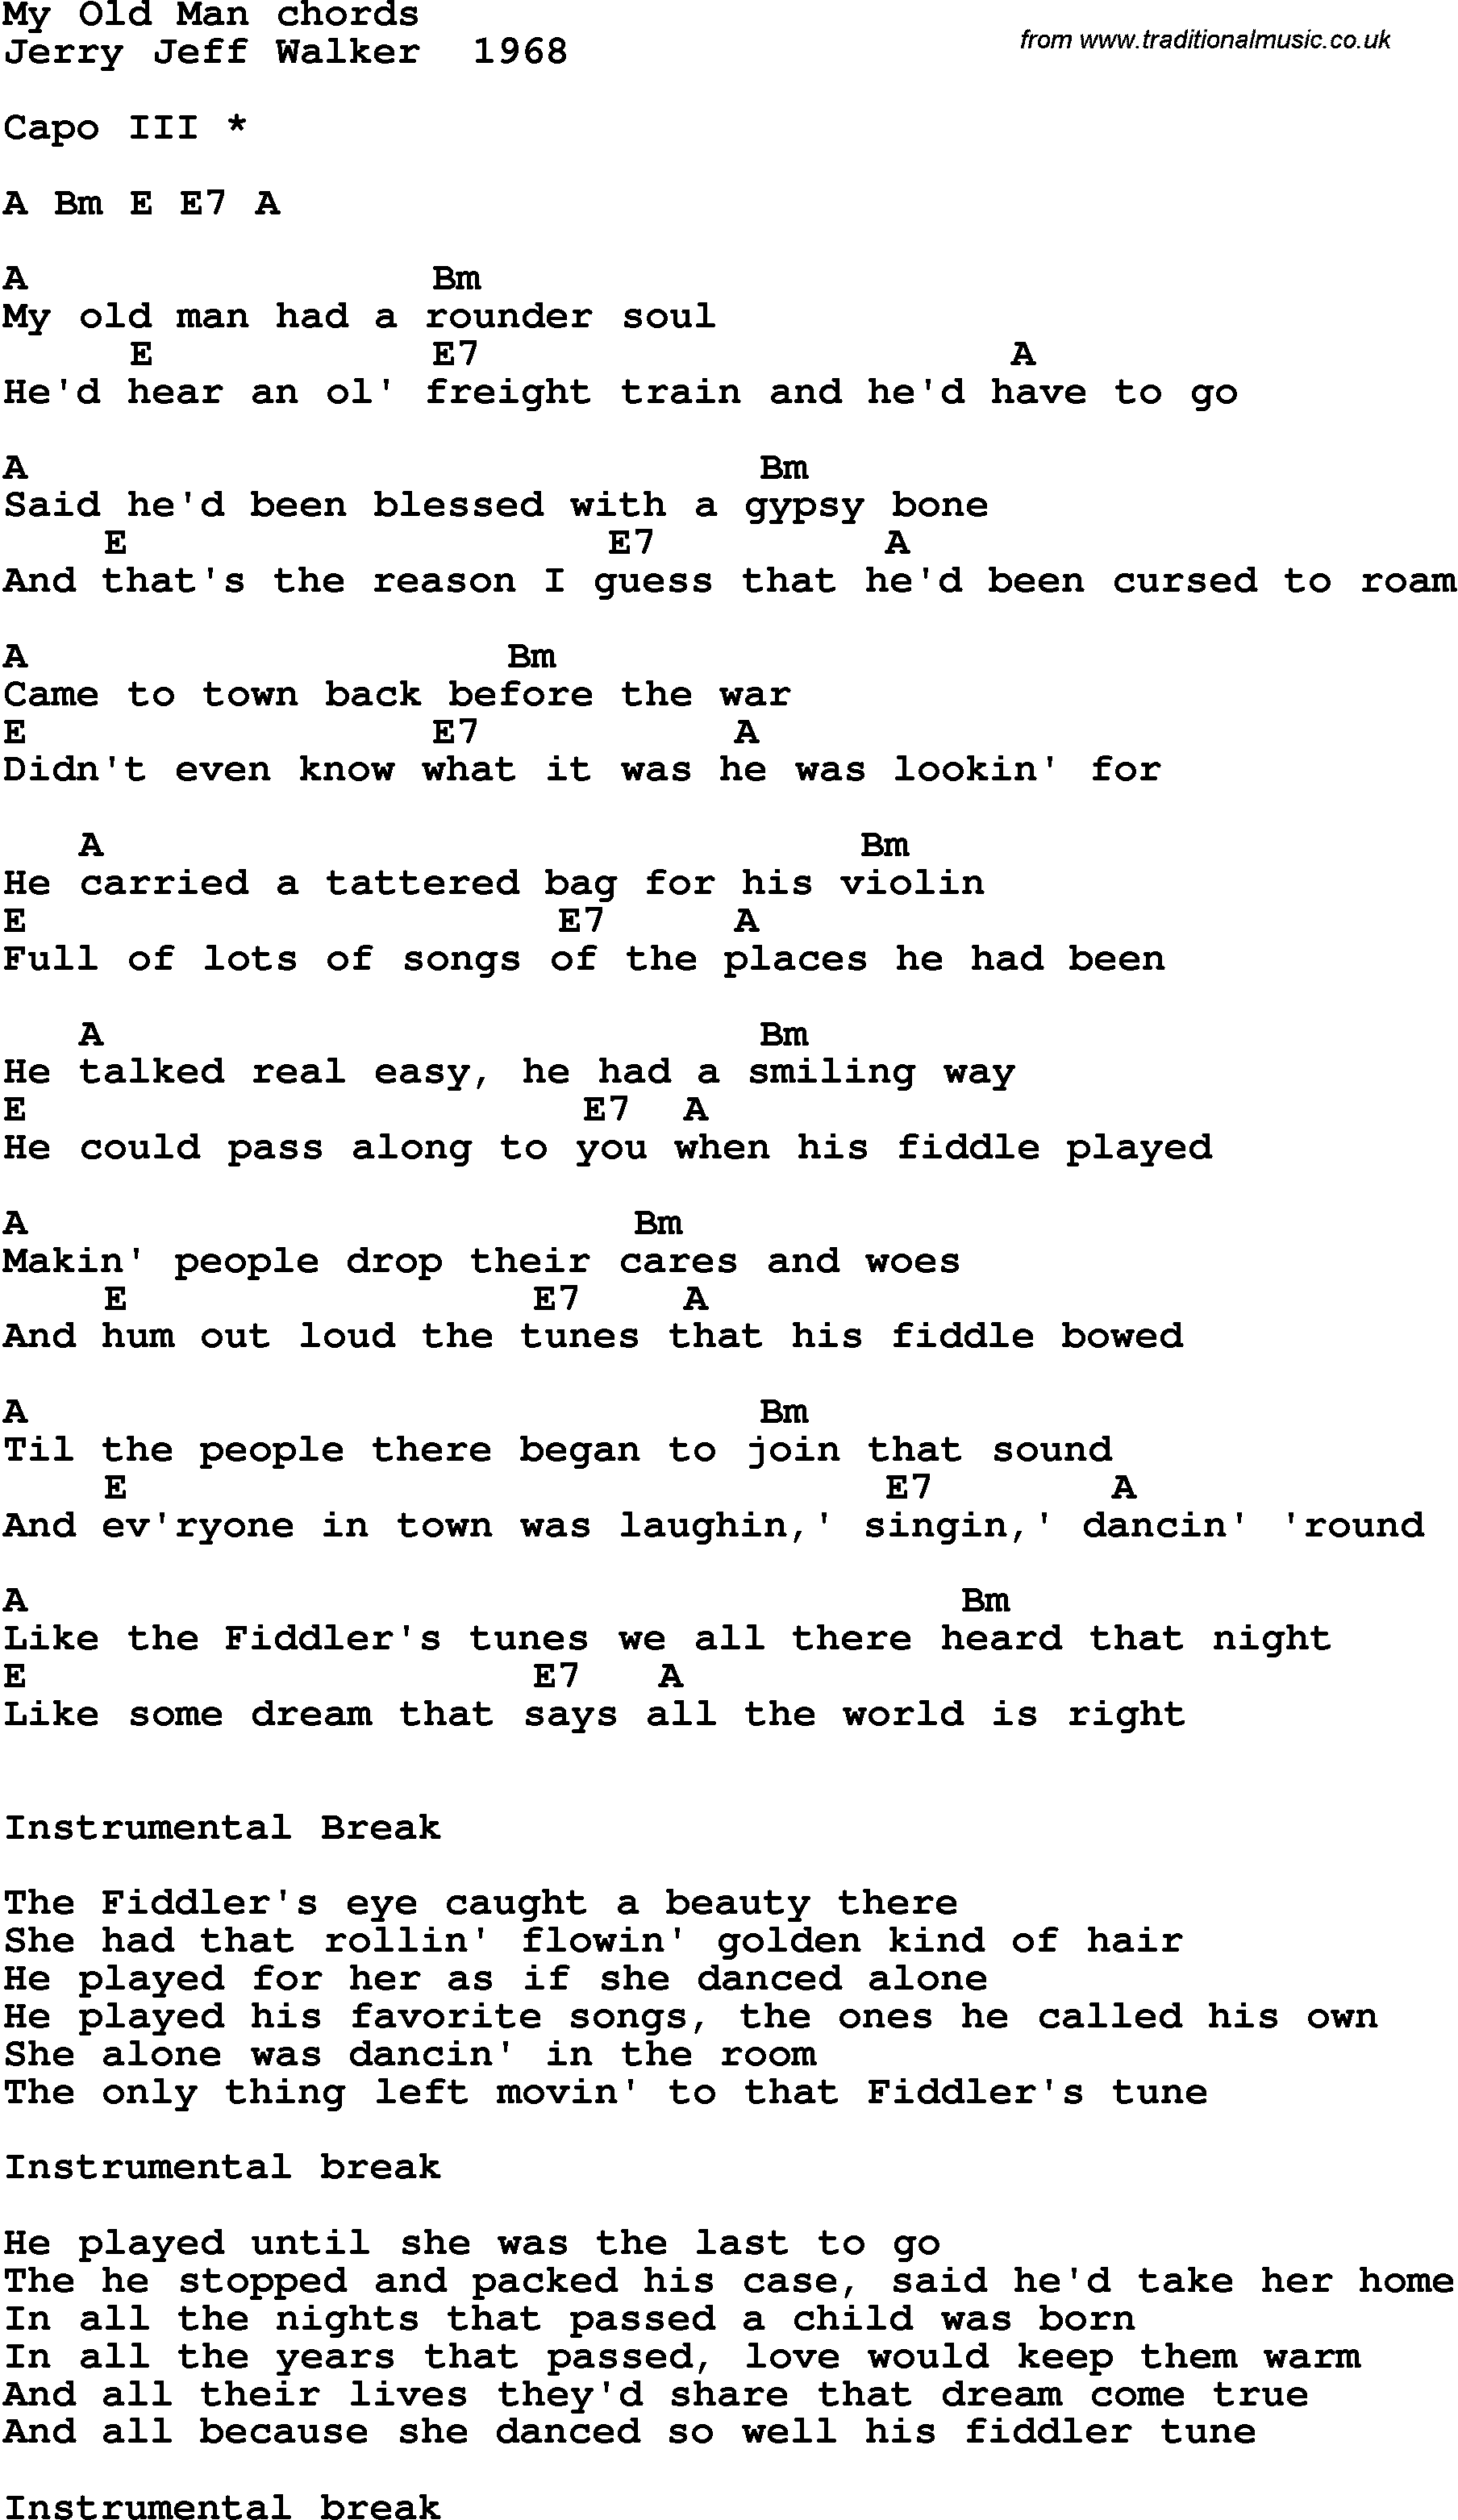 Song Lyrics with guitar chords for My Old Man